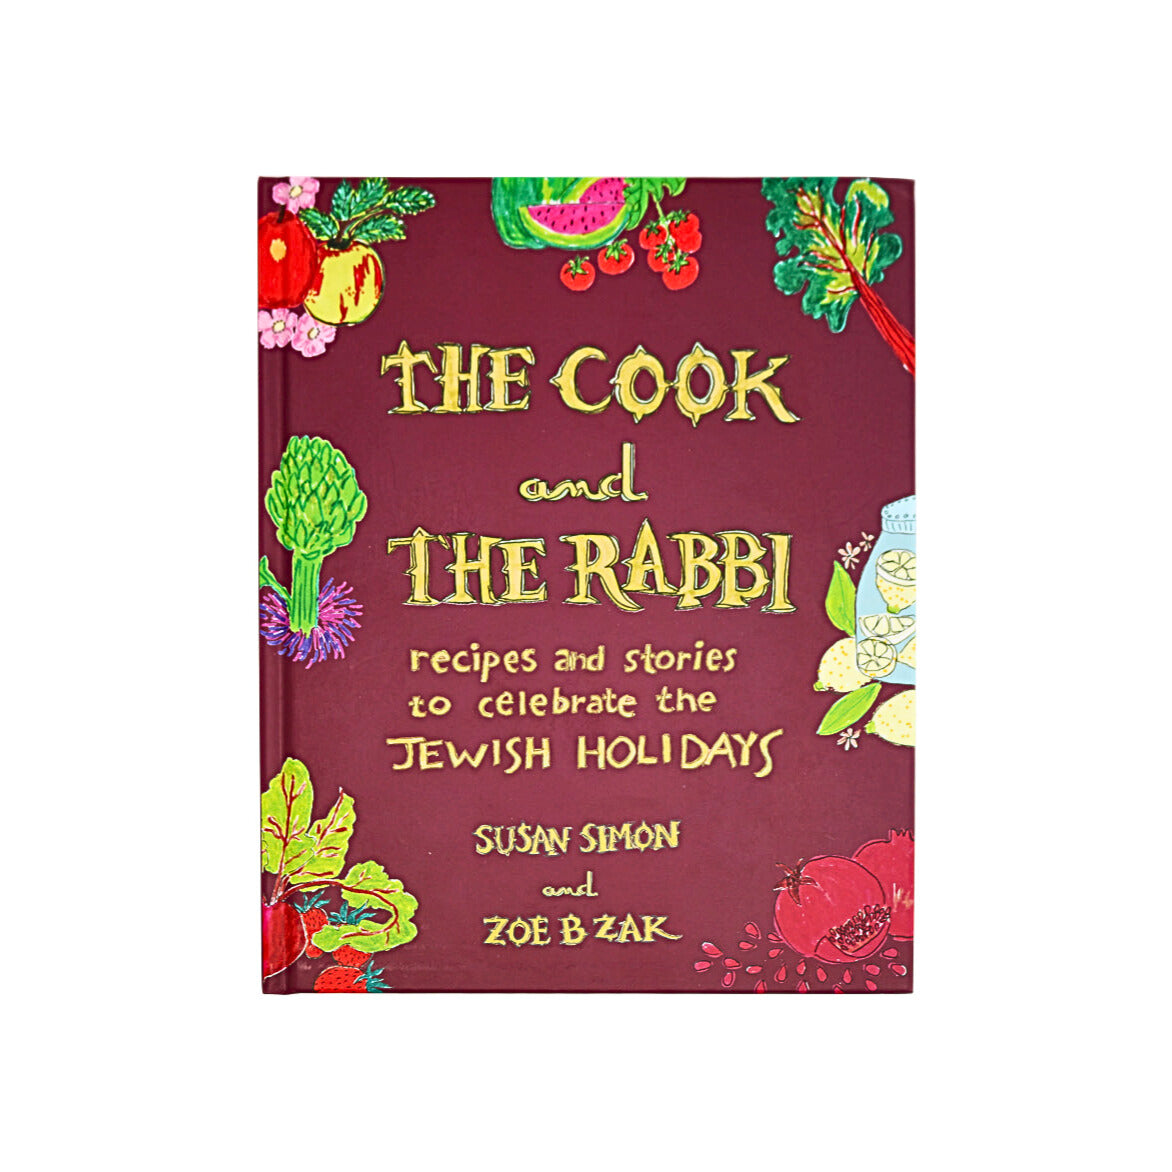 The Cook and The Rabbi